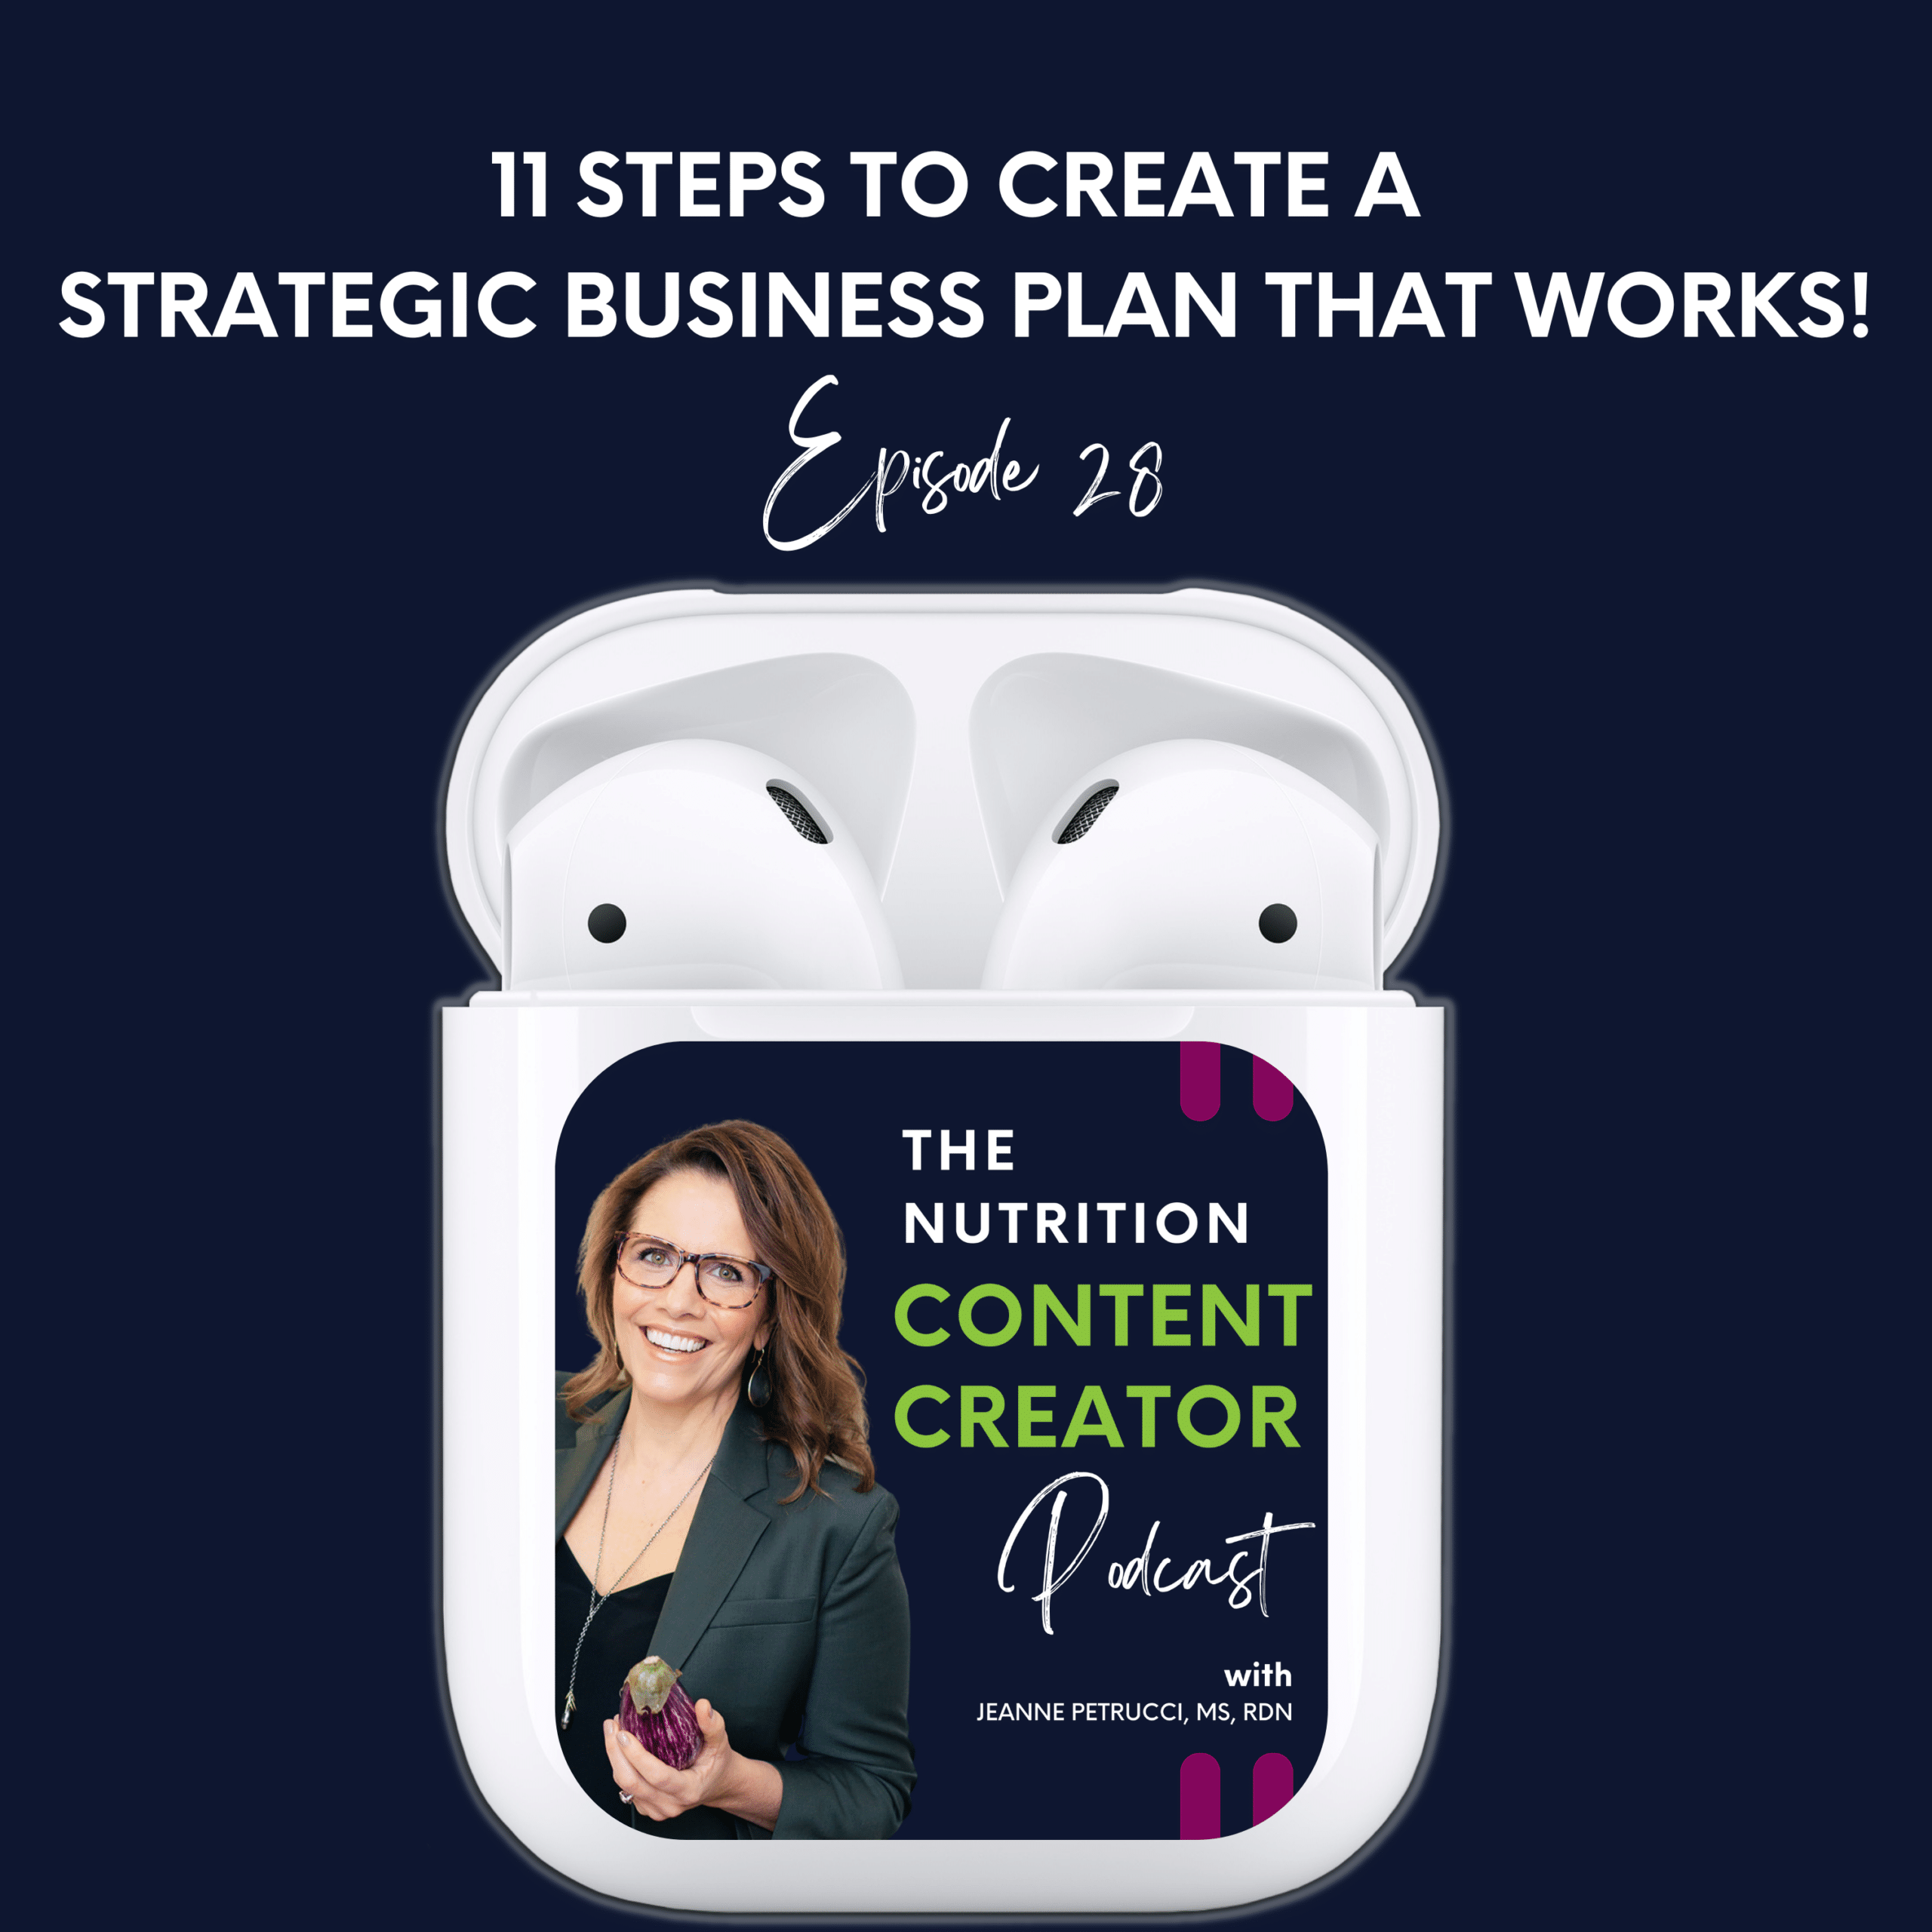 11 Steps to Create a Strategic Business Plan That Works!